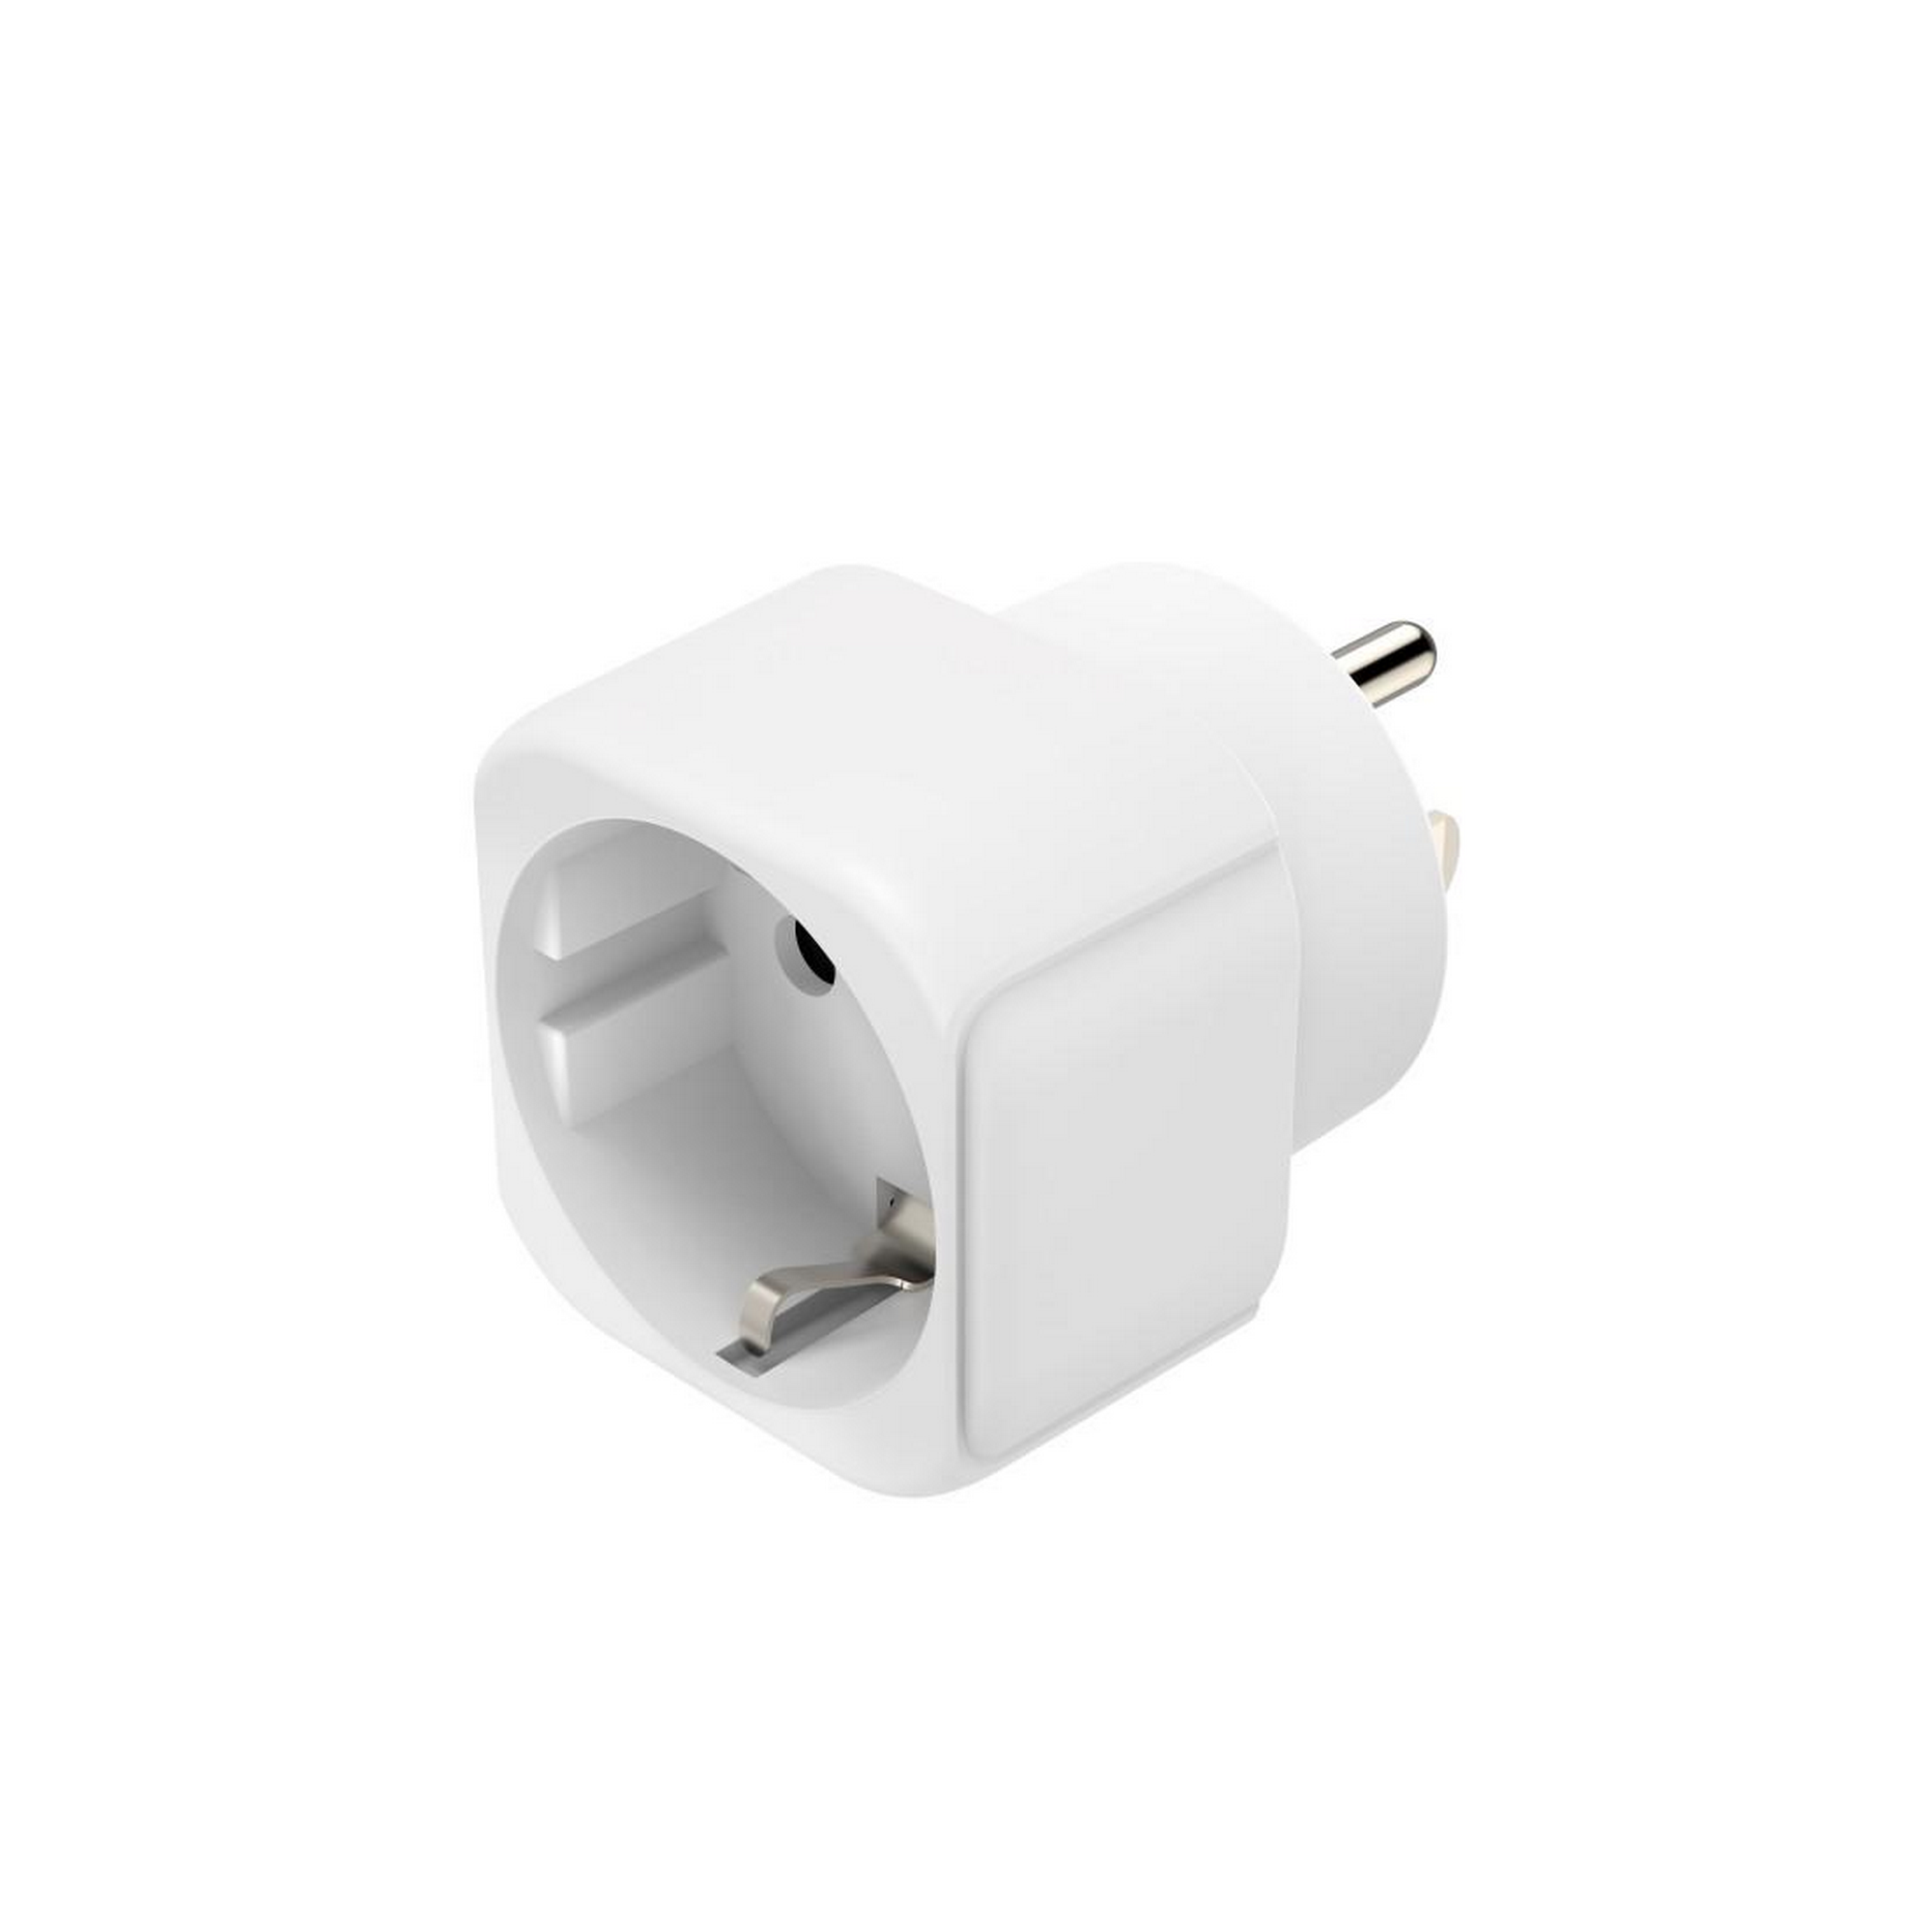 Reiseadapter Typ B weiß 3-polig + product picture